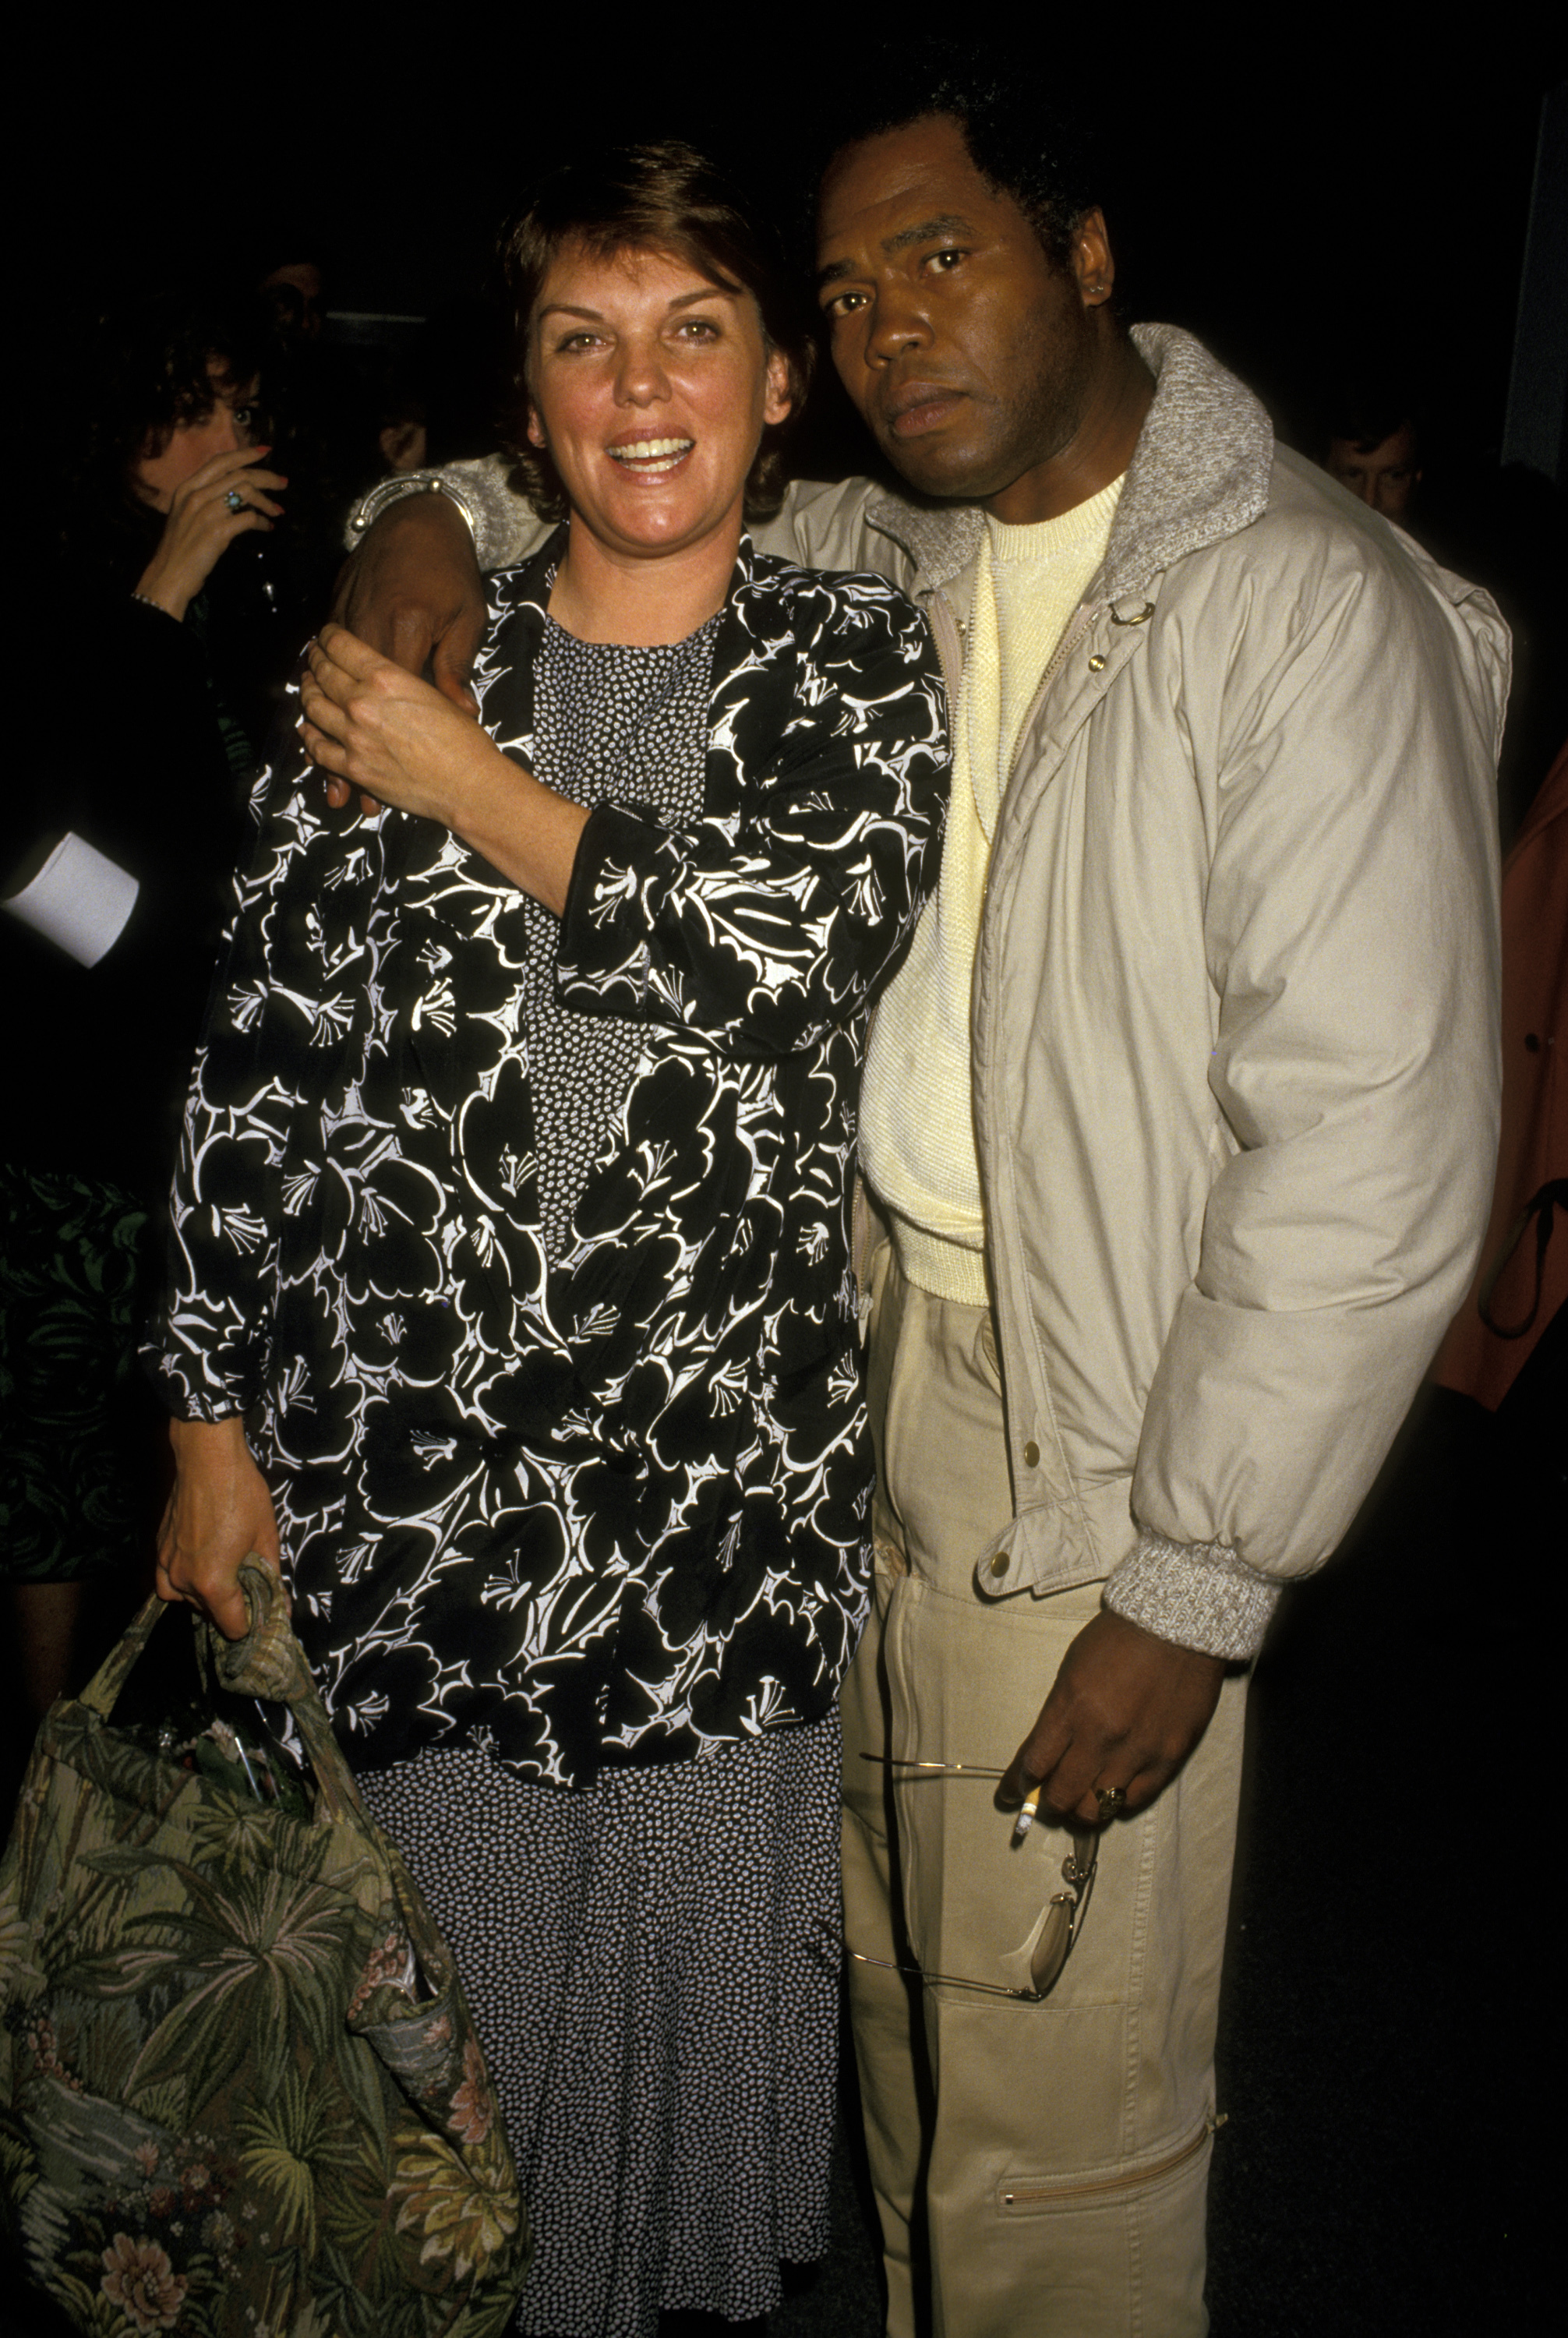 Tyne Daly and Husband Georg Stanford Brown during "Hard Times" Benefit Performance for the Homeless at LA Theater Center in Los Angeles, California, United States | Source: Getty Images